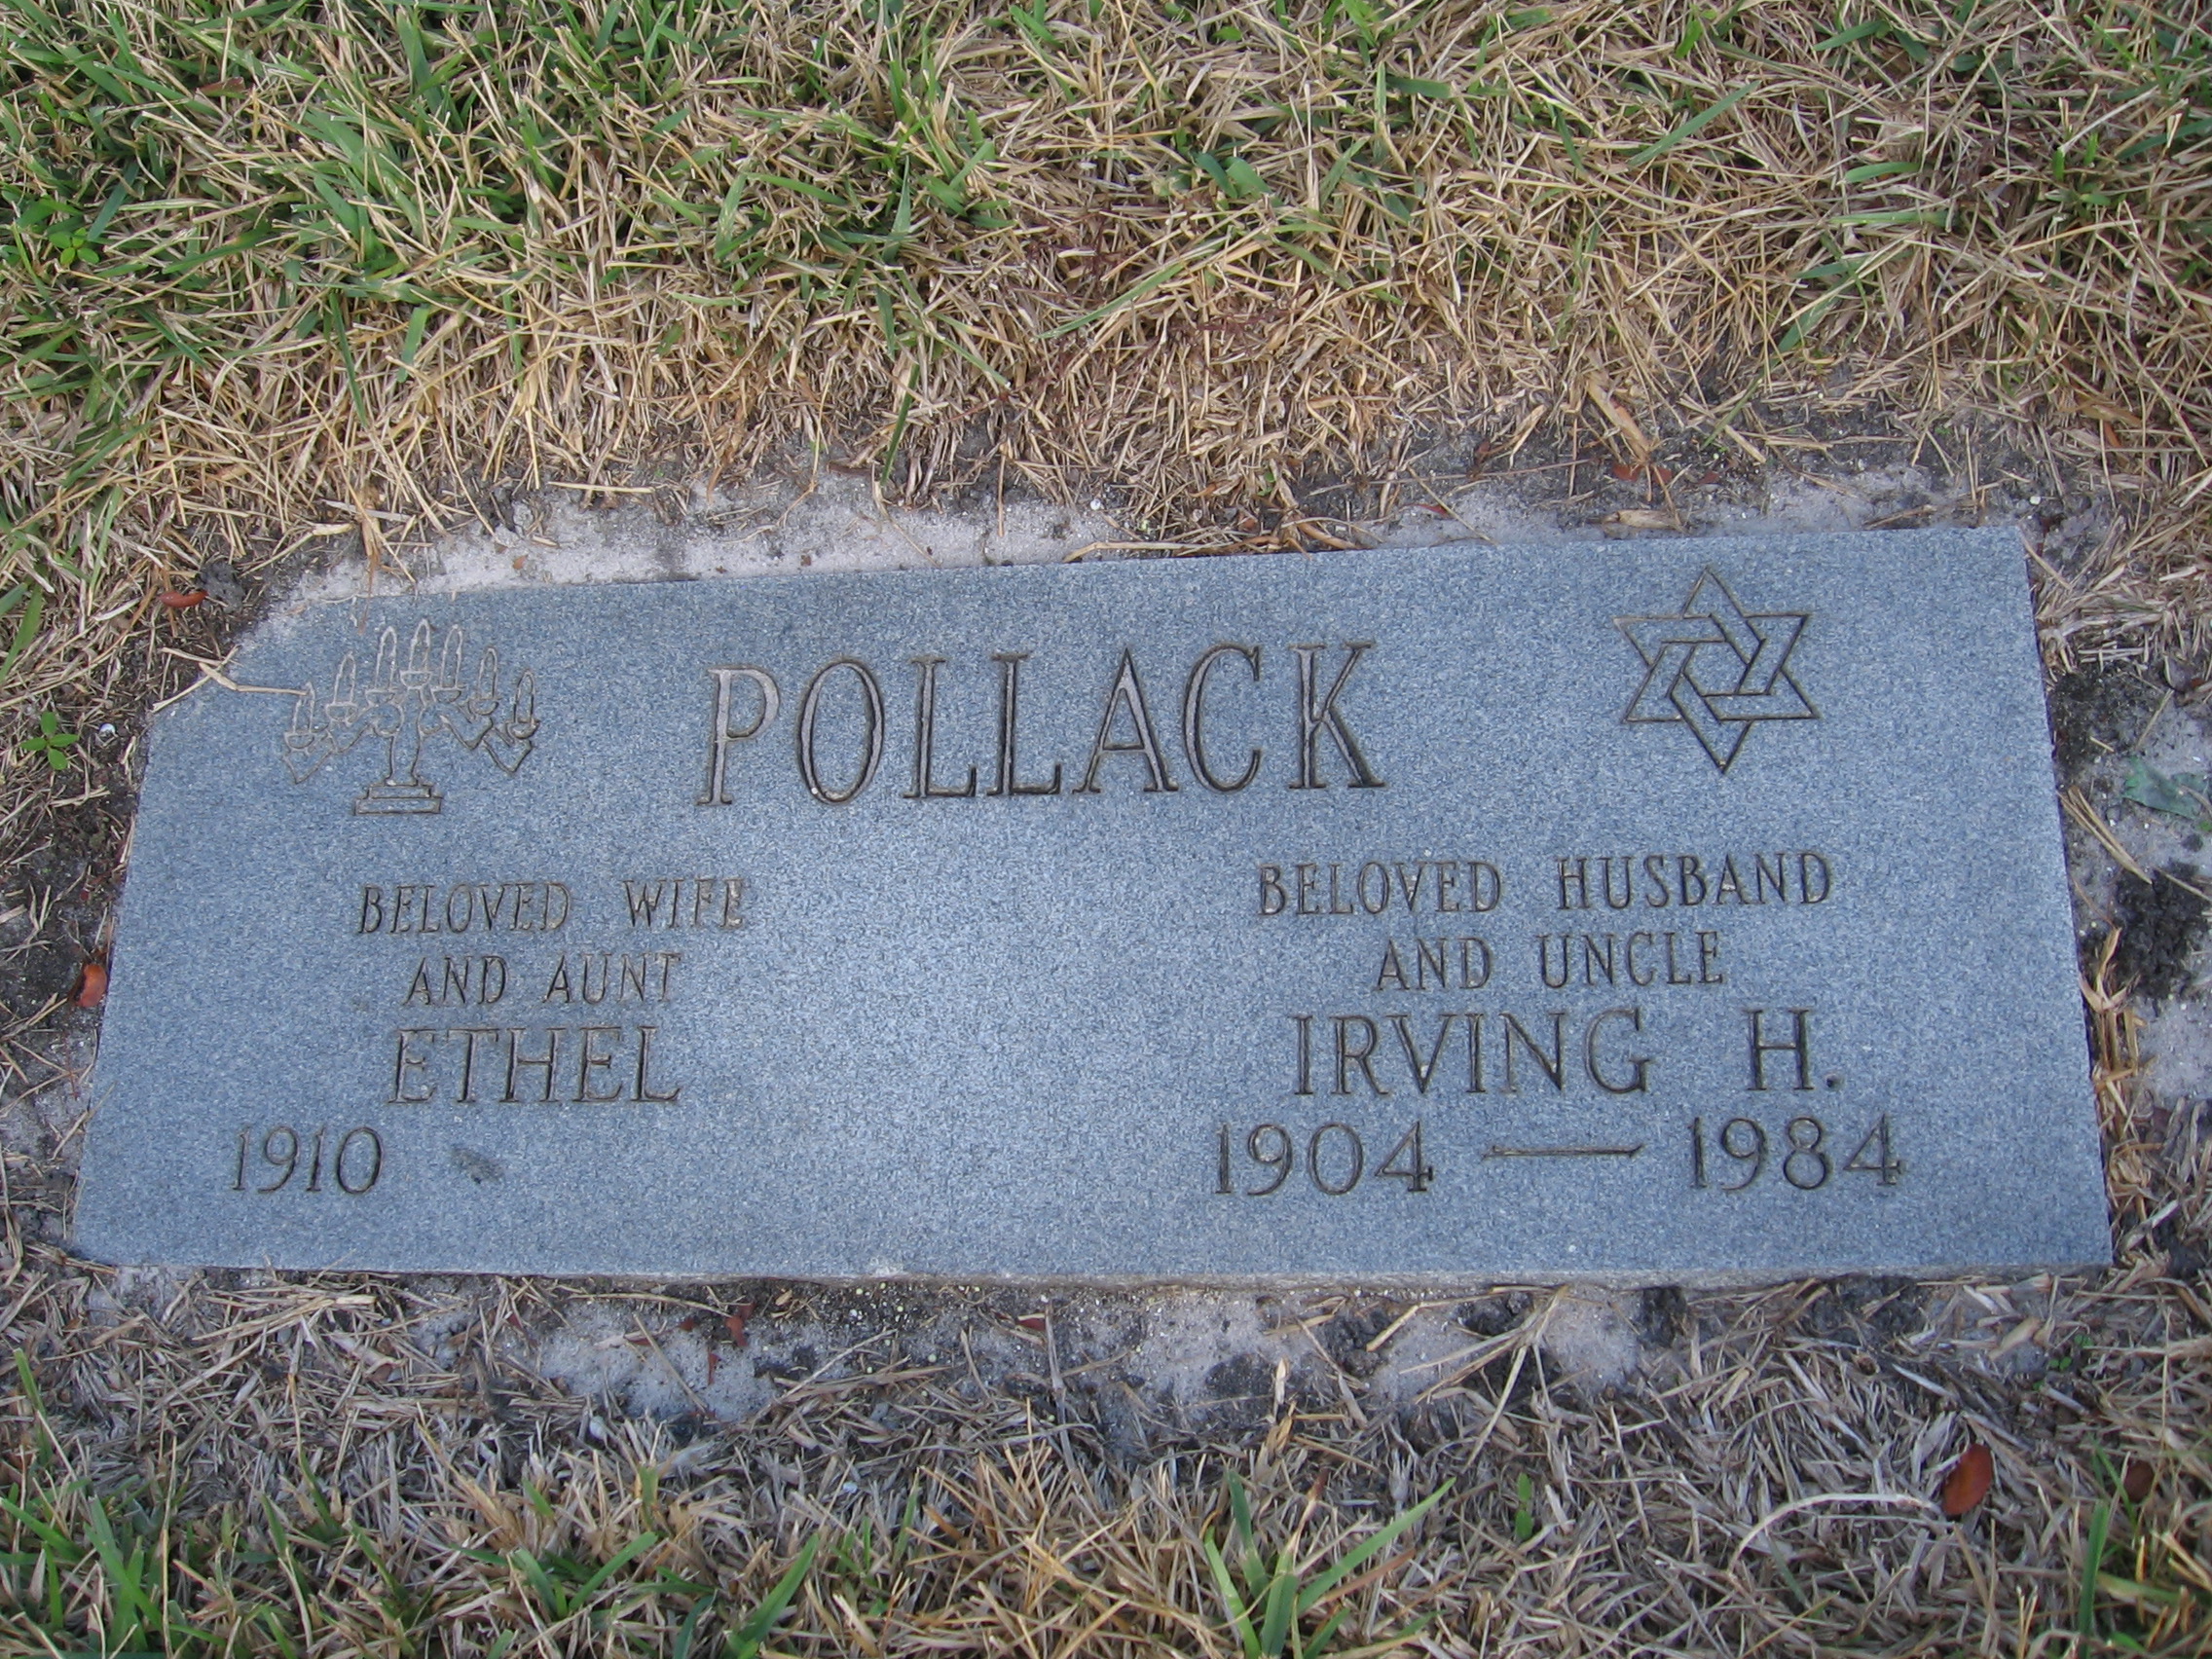 Irving H Pollack